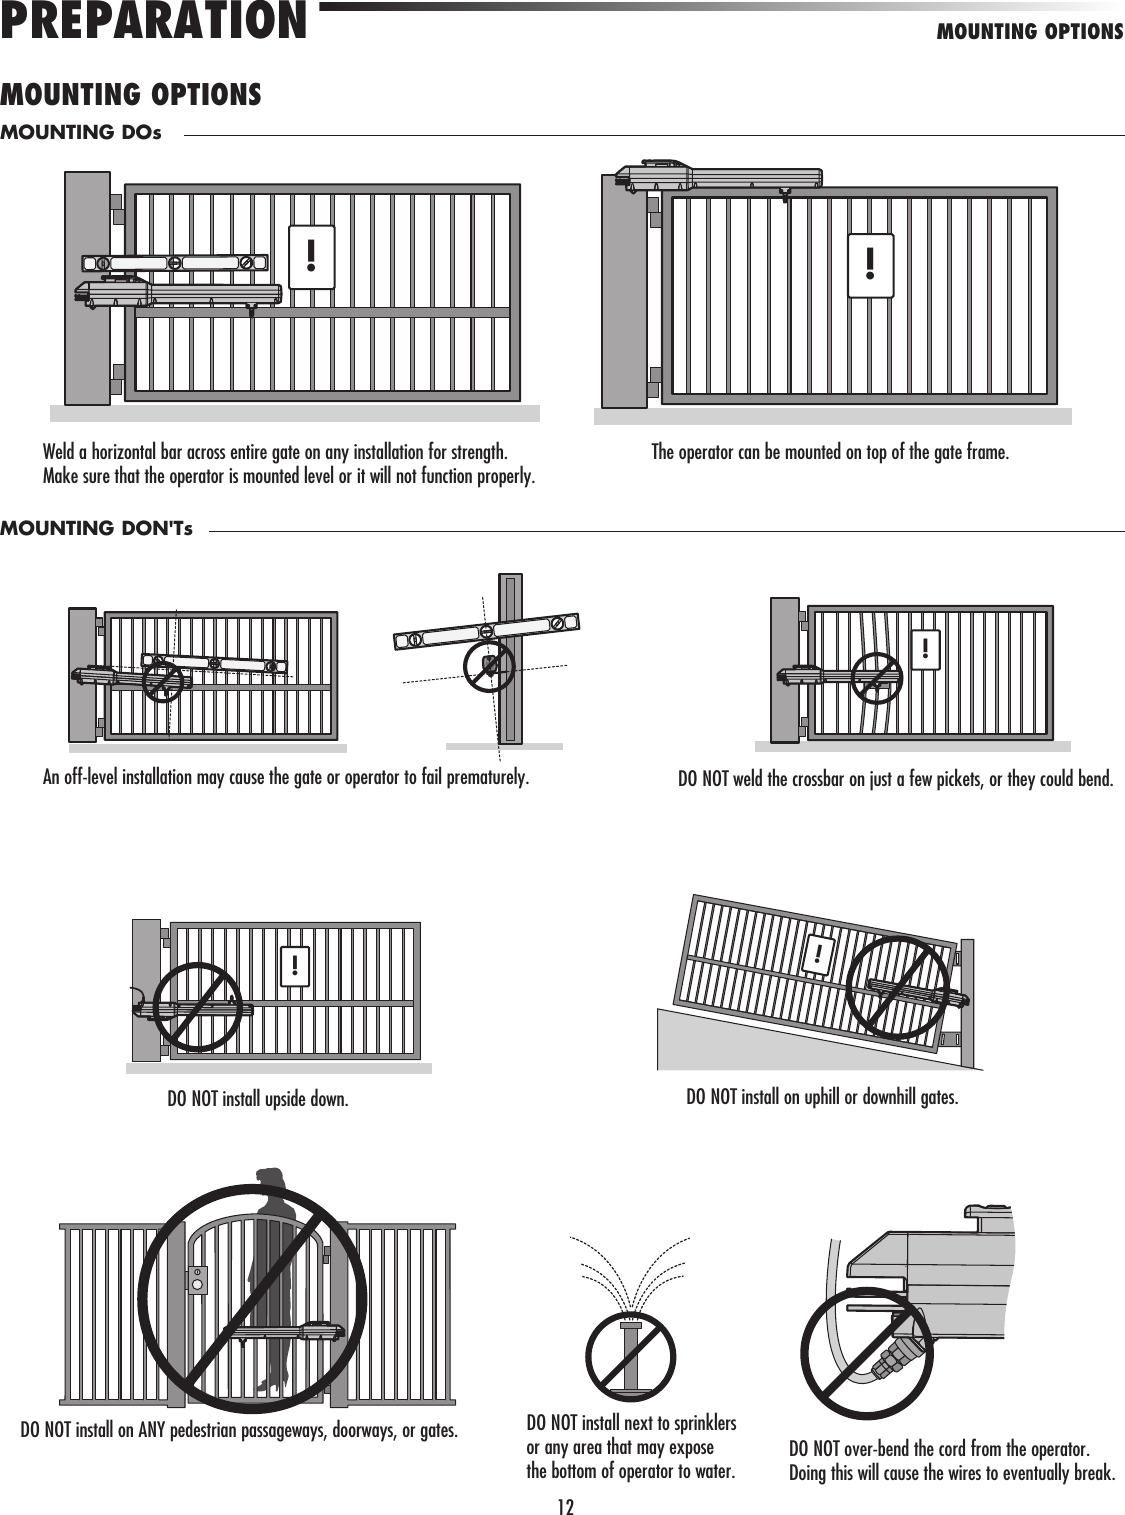 12MOUNTING OPTIONSPREPARATION!!!!!DO NOT weld the crossbar on just a few pickets, or they could bend.An off-level installation may cause the gate or operator to fail prematurely.The operator can be mounted on top of the gate frame.MOUNTING OPTIONSDO NOT install upside down.DO NOT install on ANY pedestrian passageways, doorways, or gates.DO NOT install on uphill or downhill gates.DO NOT install next to sprinklers or any area that may expose the bottom of operator to water. DO NOT over-bend the cord from the operator. Doing this will cause the wires to eventually break.Weld a horizontal bar across entire gate on any installation for strength. Make sure that the operator is mounted level or it will not function properly.MOUNTING DOsMOUNTING DON&apos;Ts